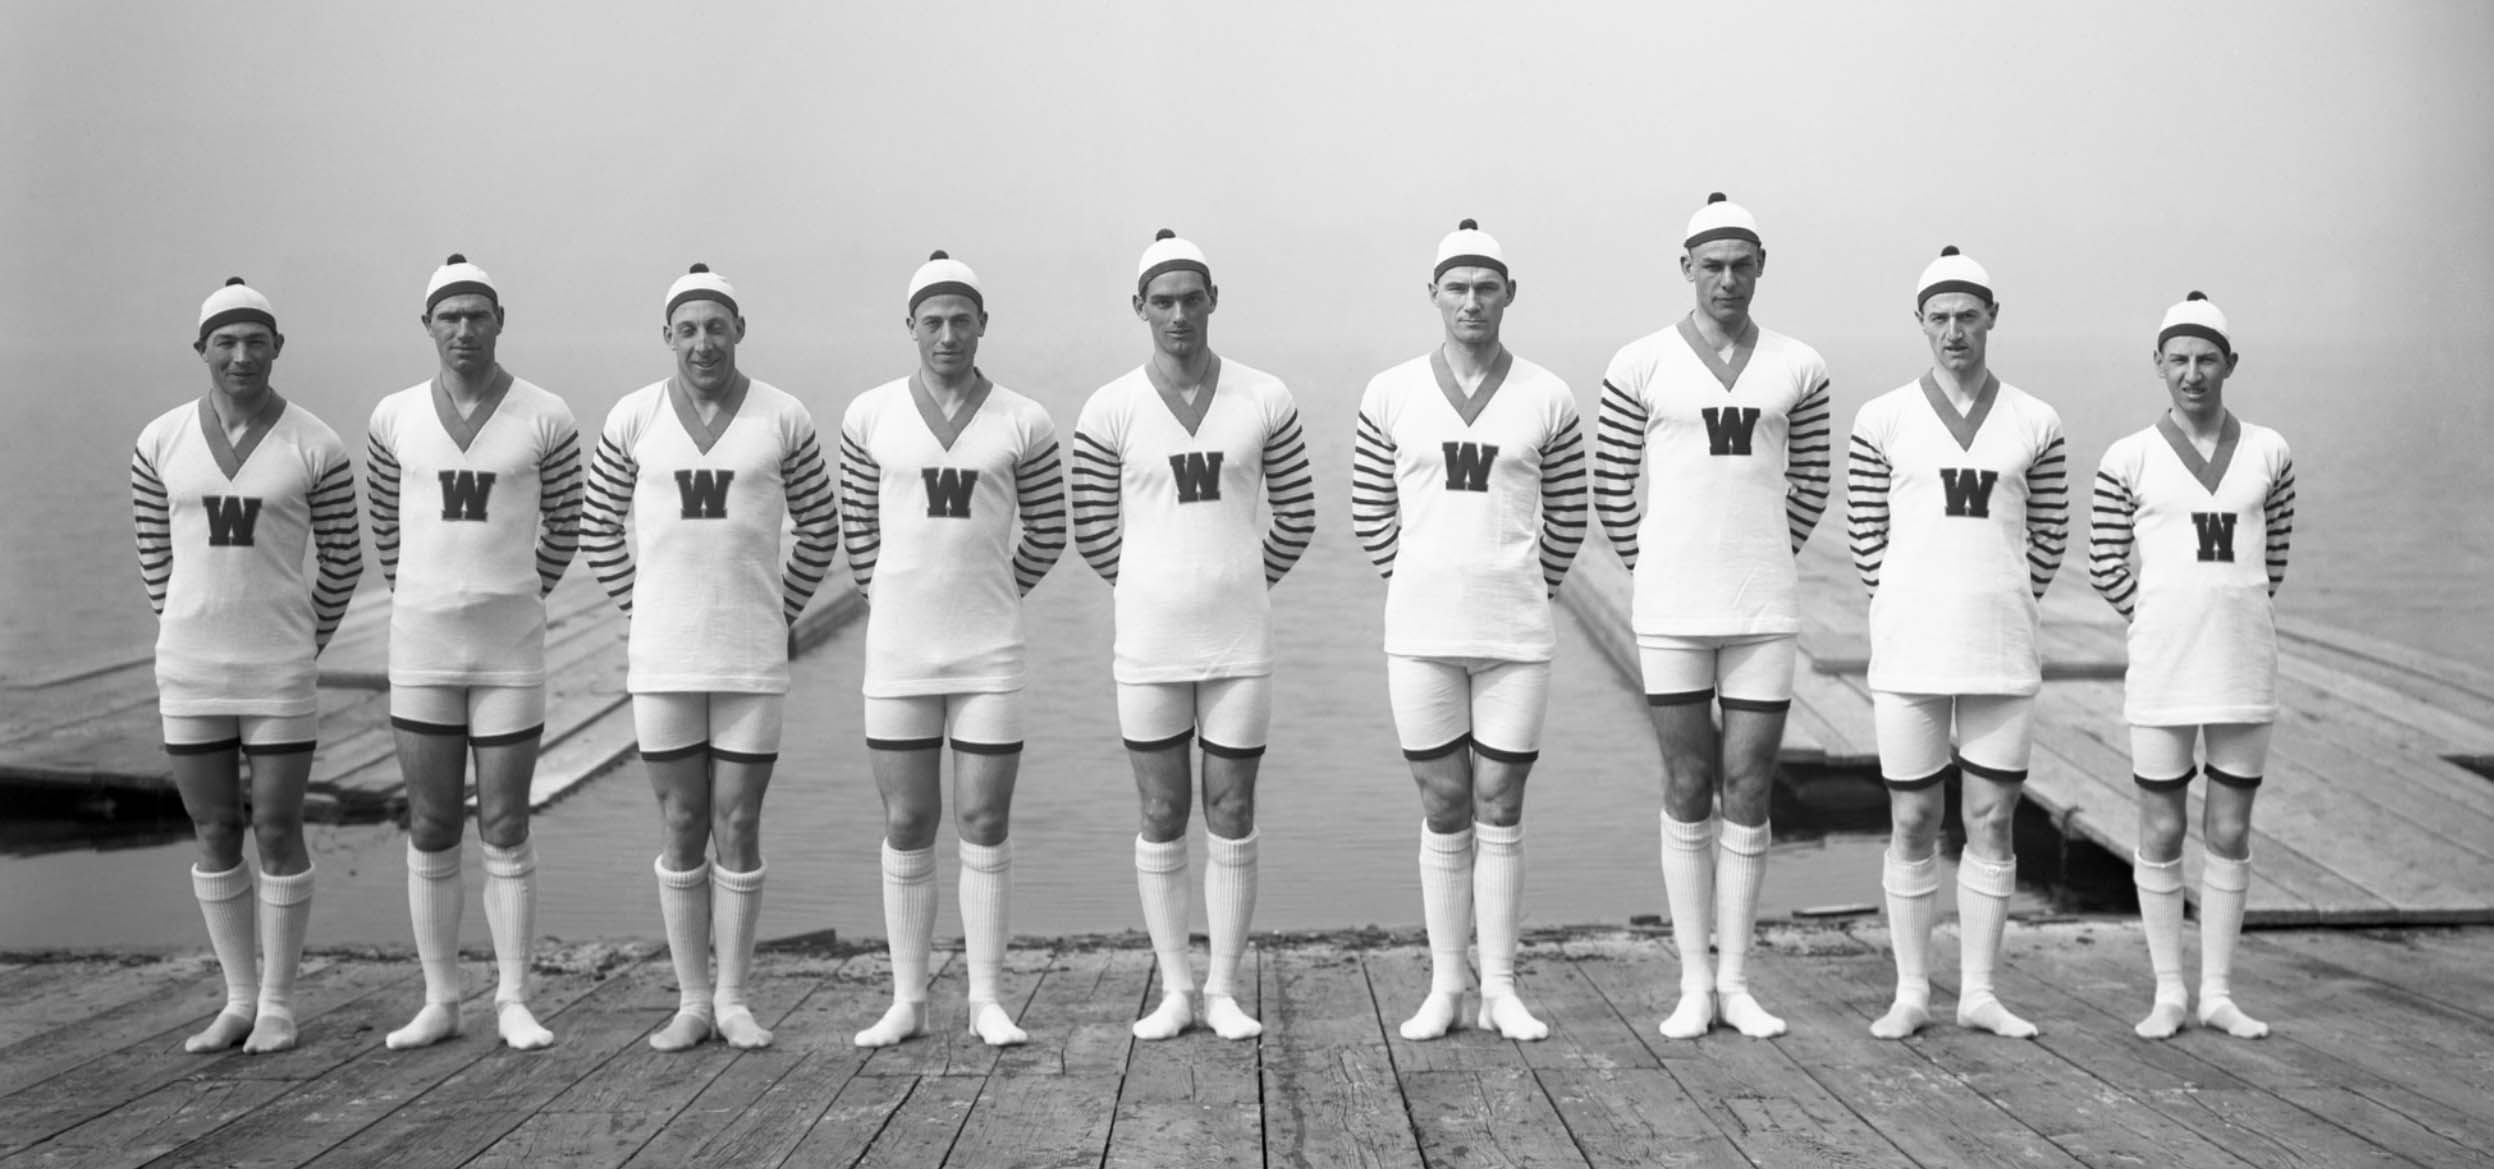 Old photo of a rowing team on a pier.